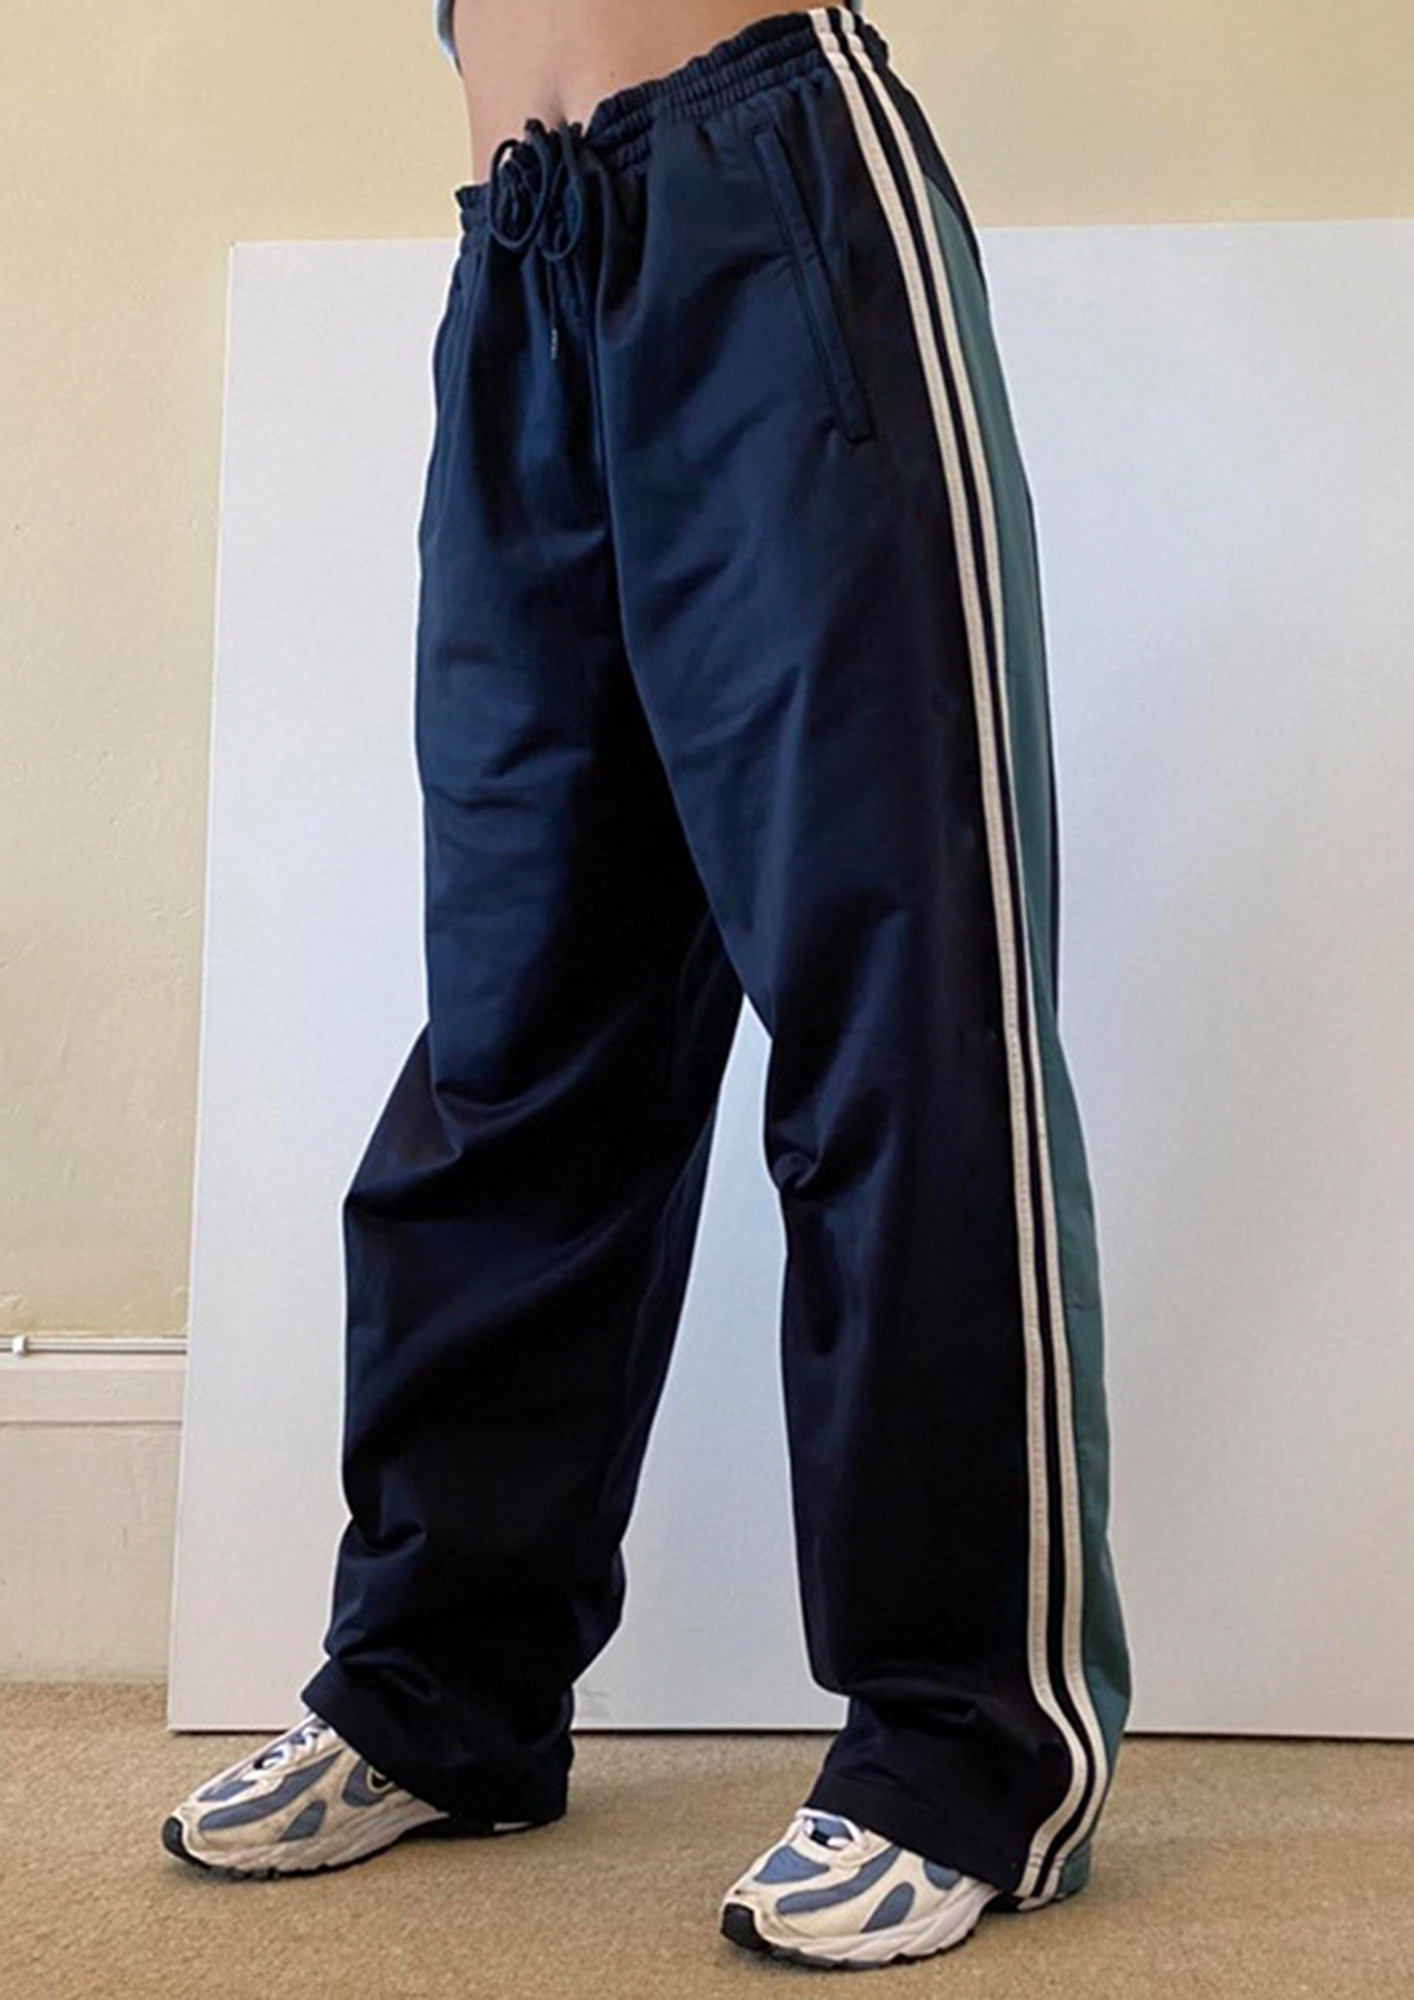 Mens Quick Drying Loose Fit Lightweight Track Pants With Woven Foot Binding  For Outdoor Activities Ideal For Fitness, Mountaineering, Gym, And Jogging  From Luyogastar, $22.85 | DHgate.Com